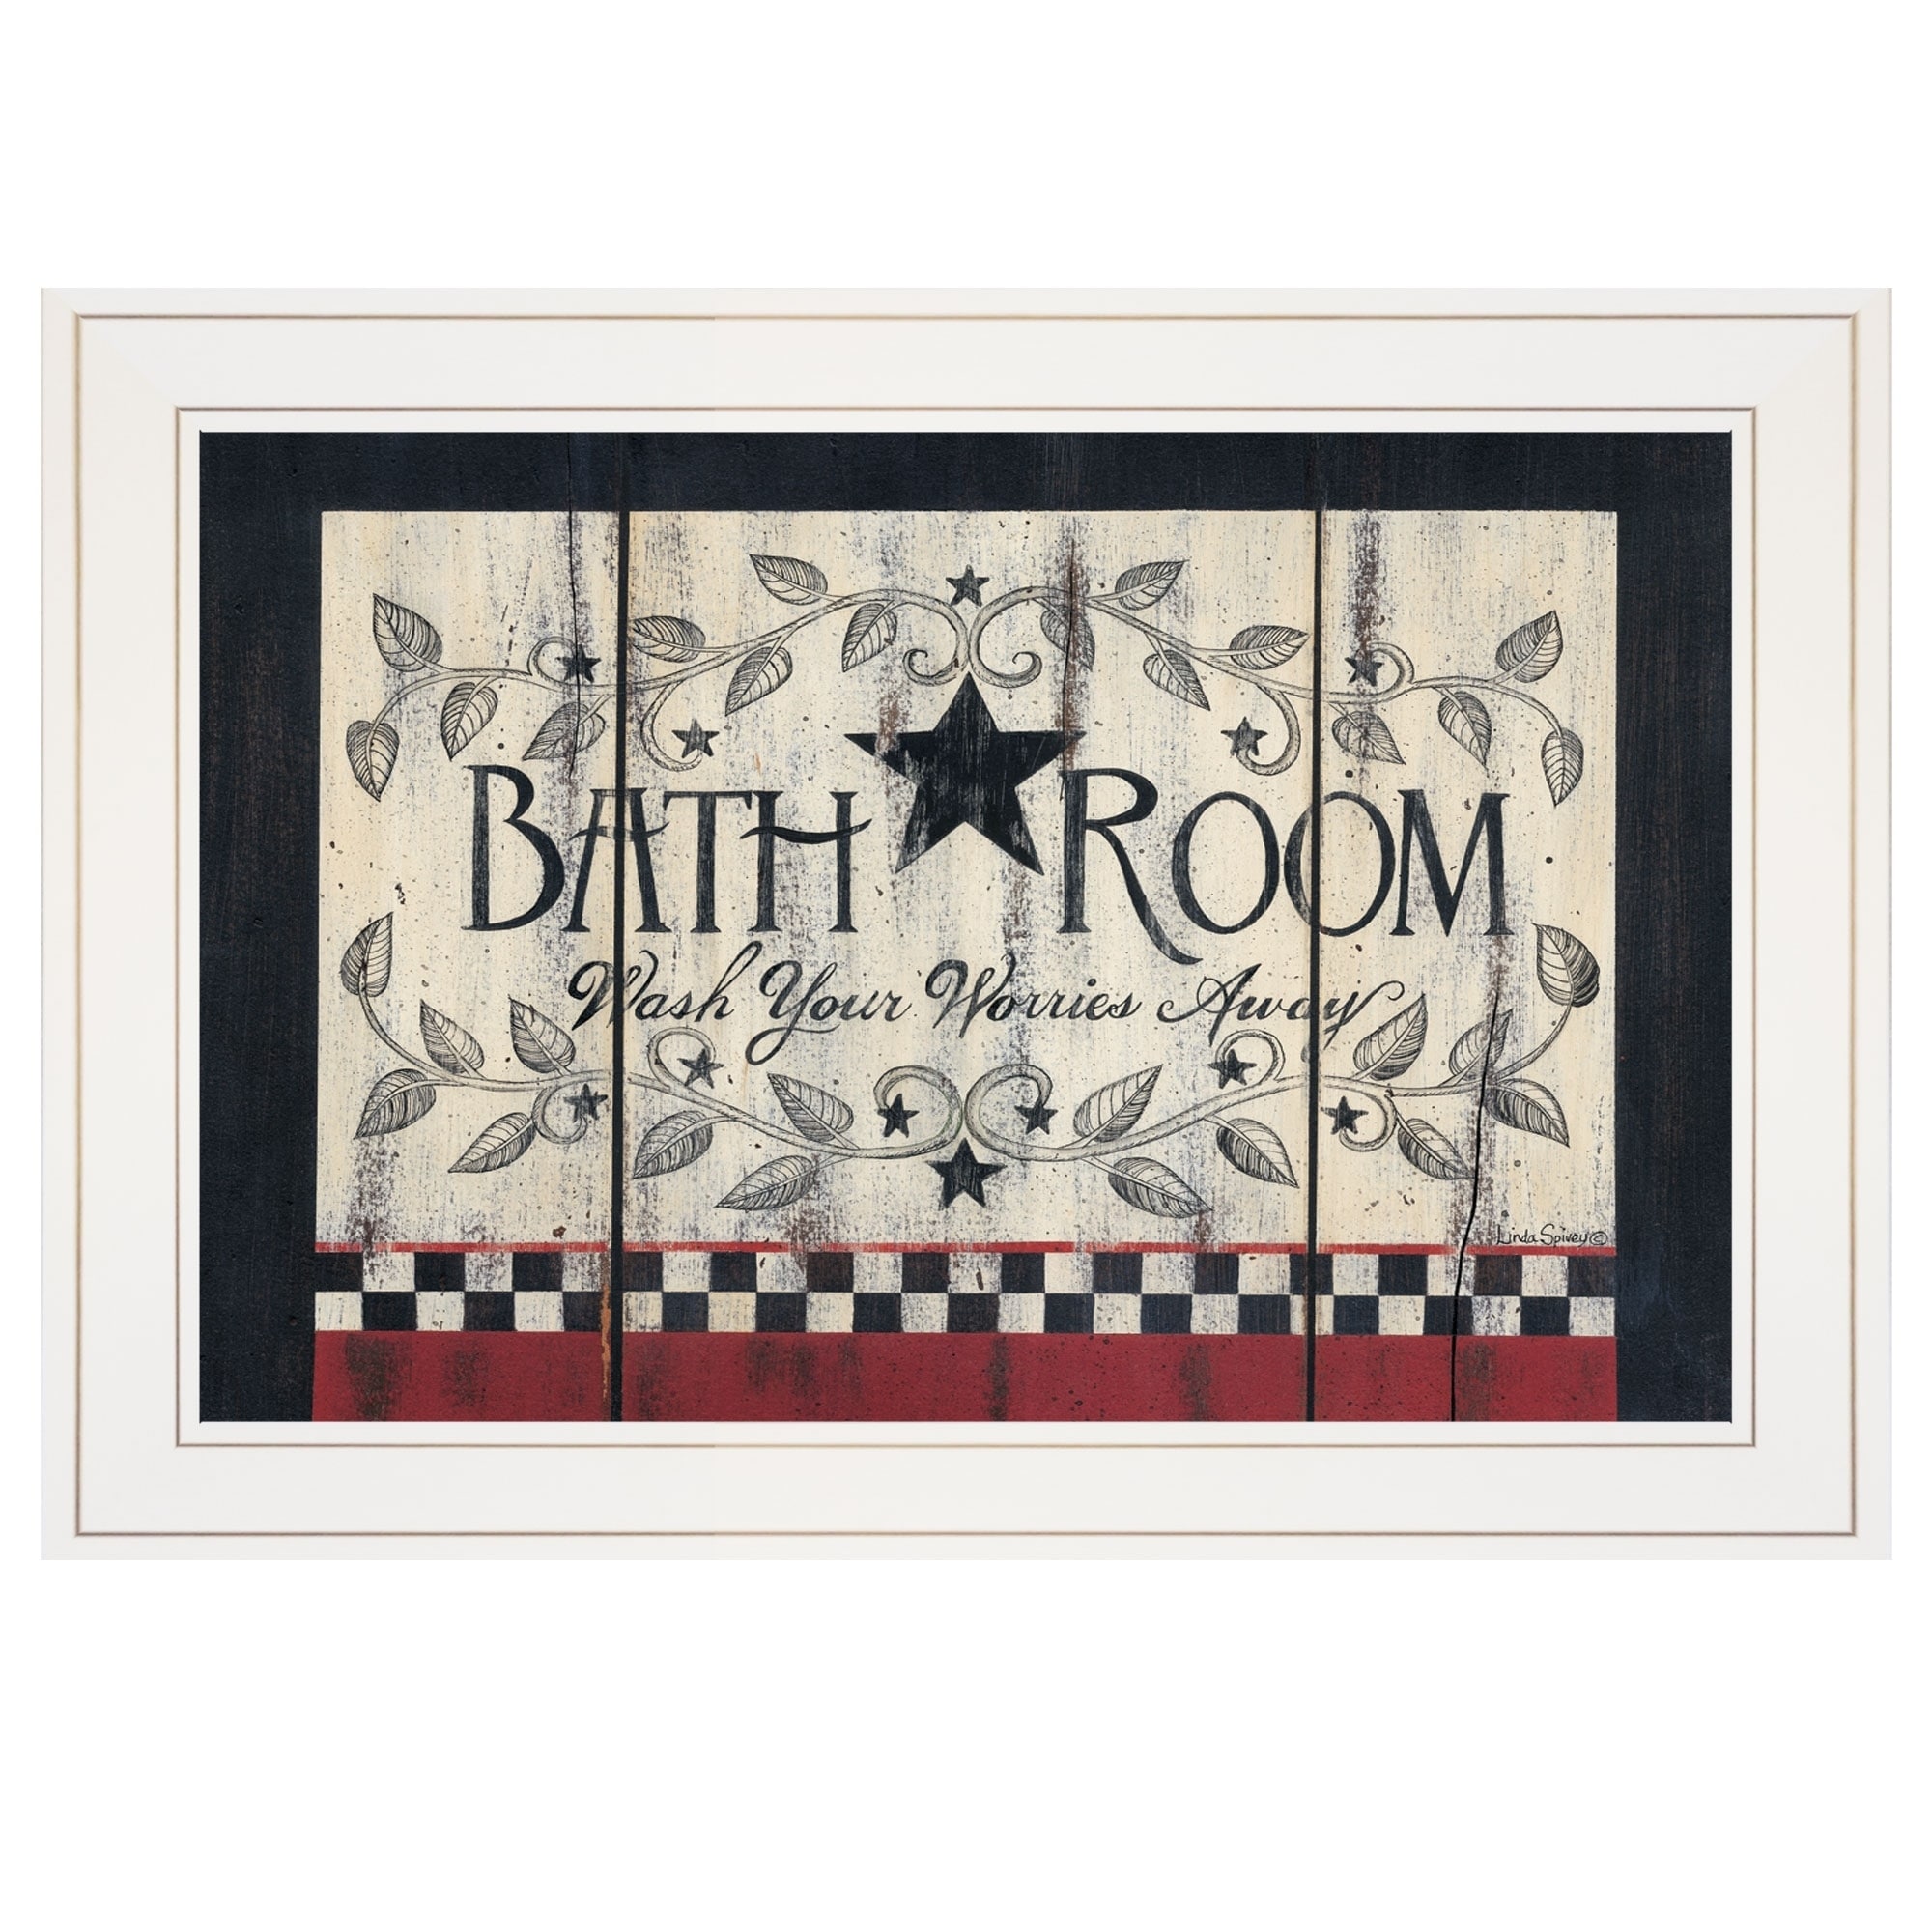 Bathroom By Linda Spivey Ready To Hang Framed Print White Frame On Sale Overstock 25434377